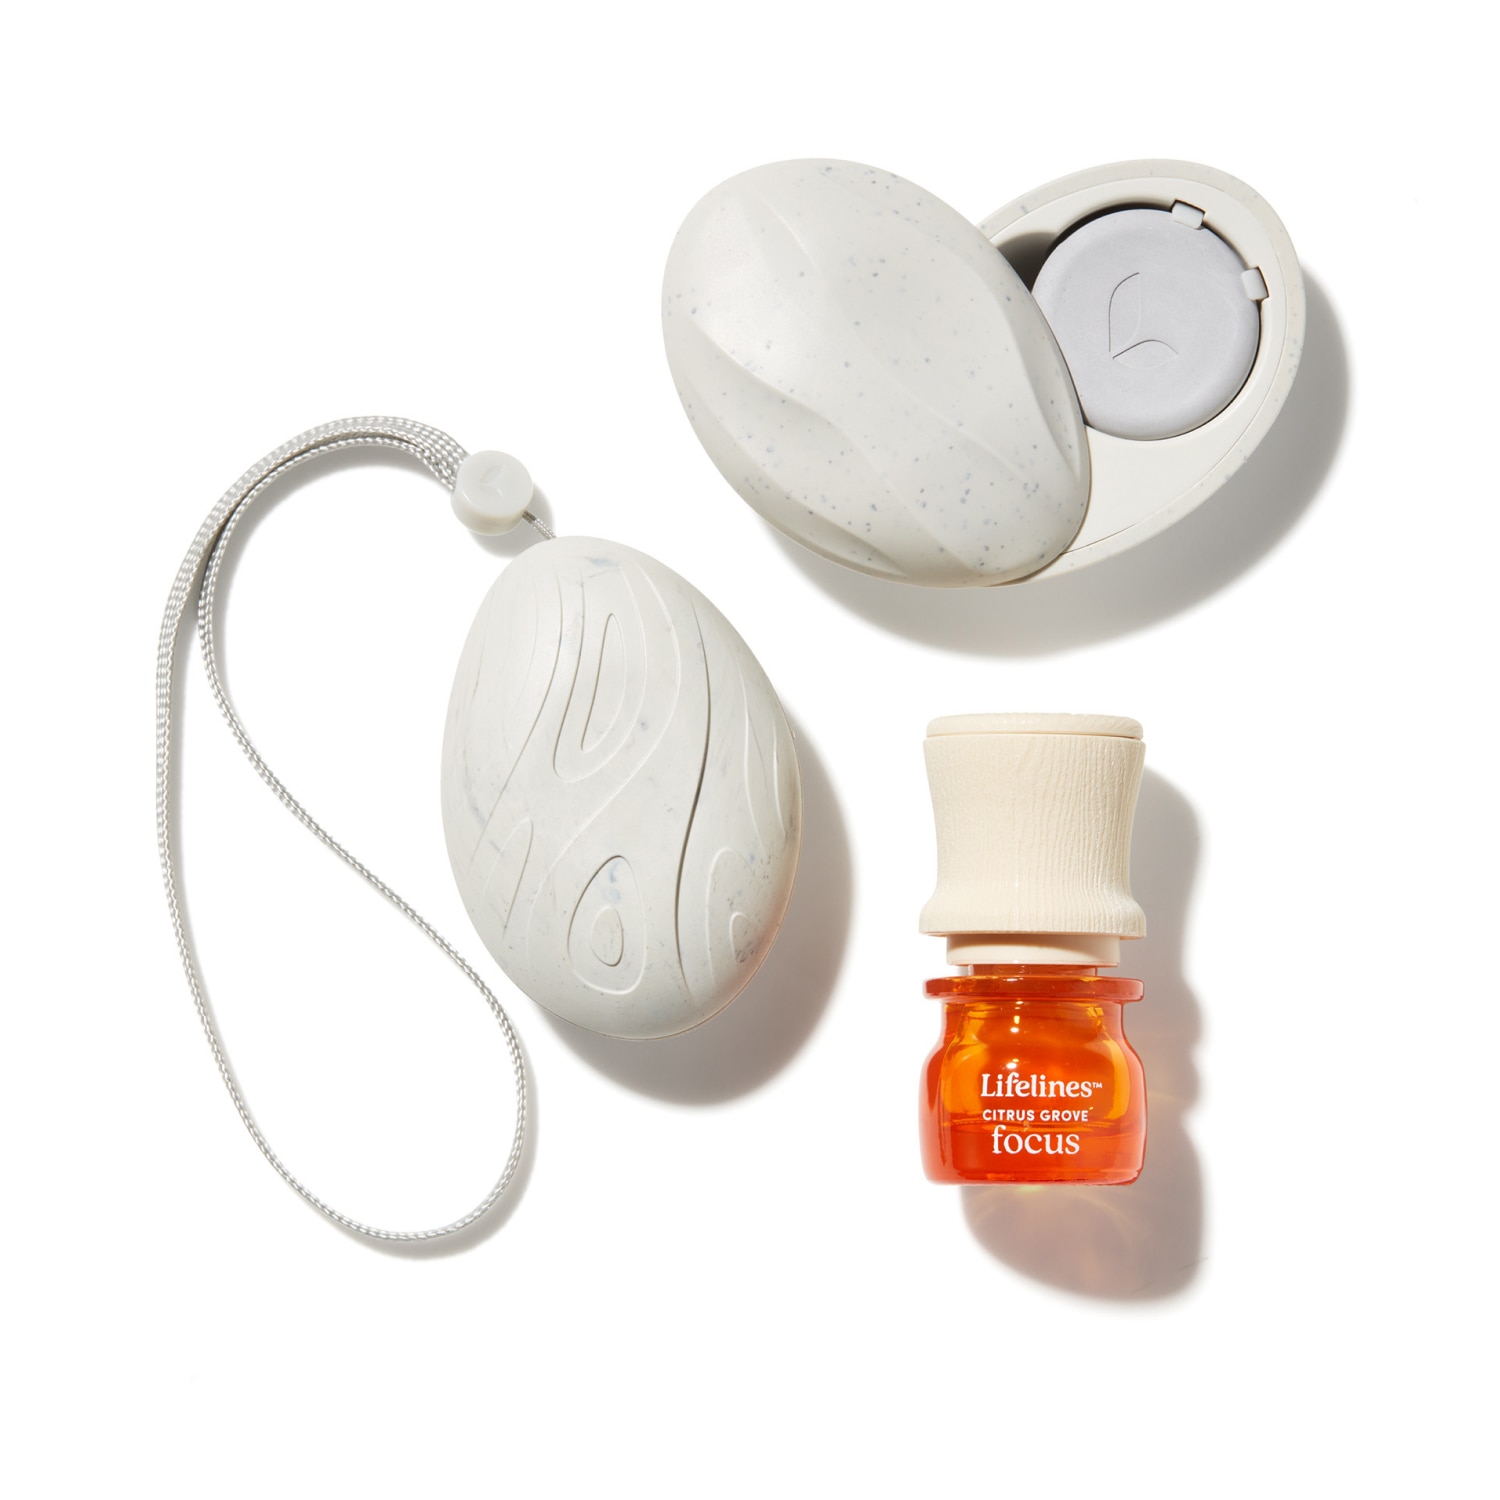 Lifelines Grounding Stones - Tactile Collection plus Essential Oil Blend